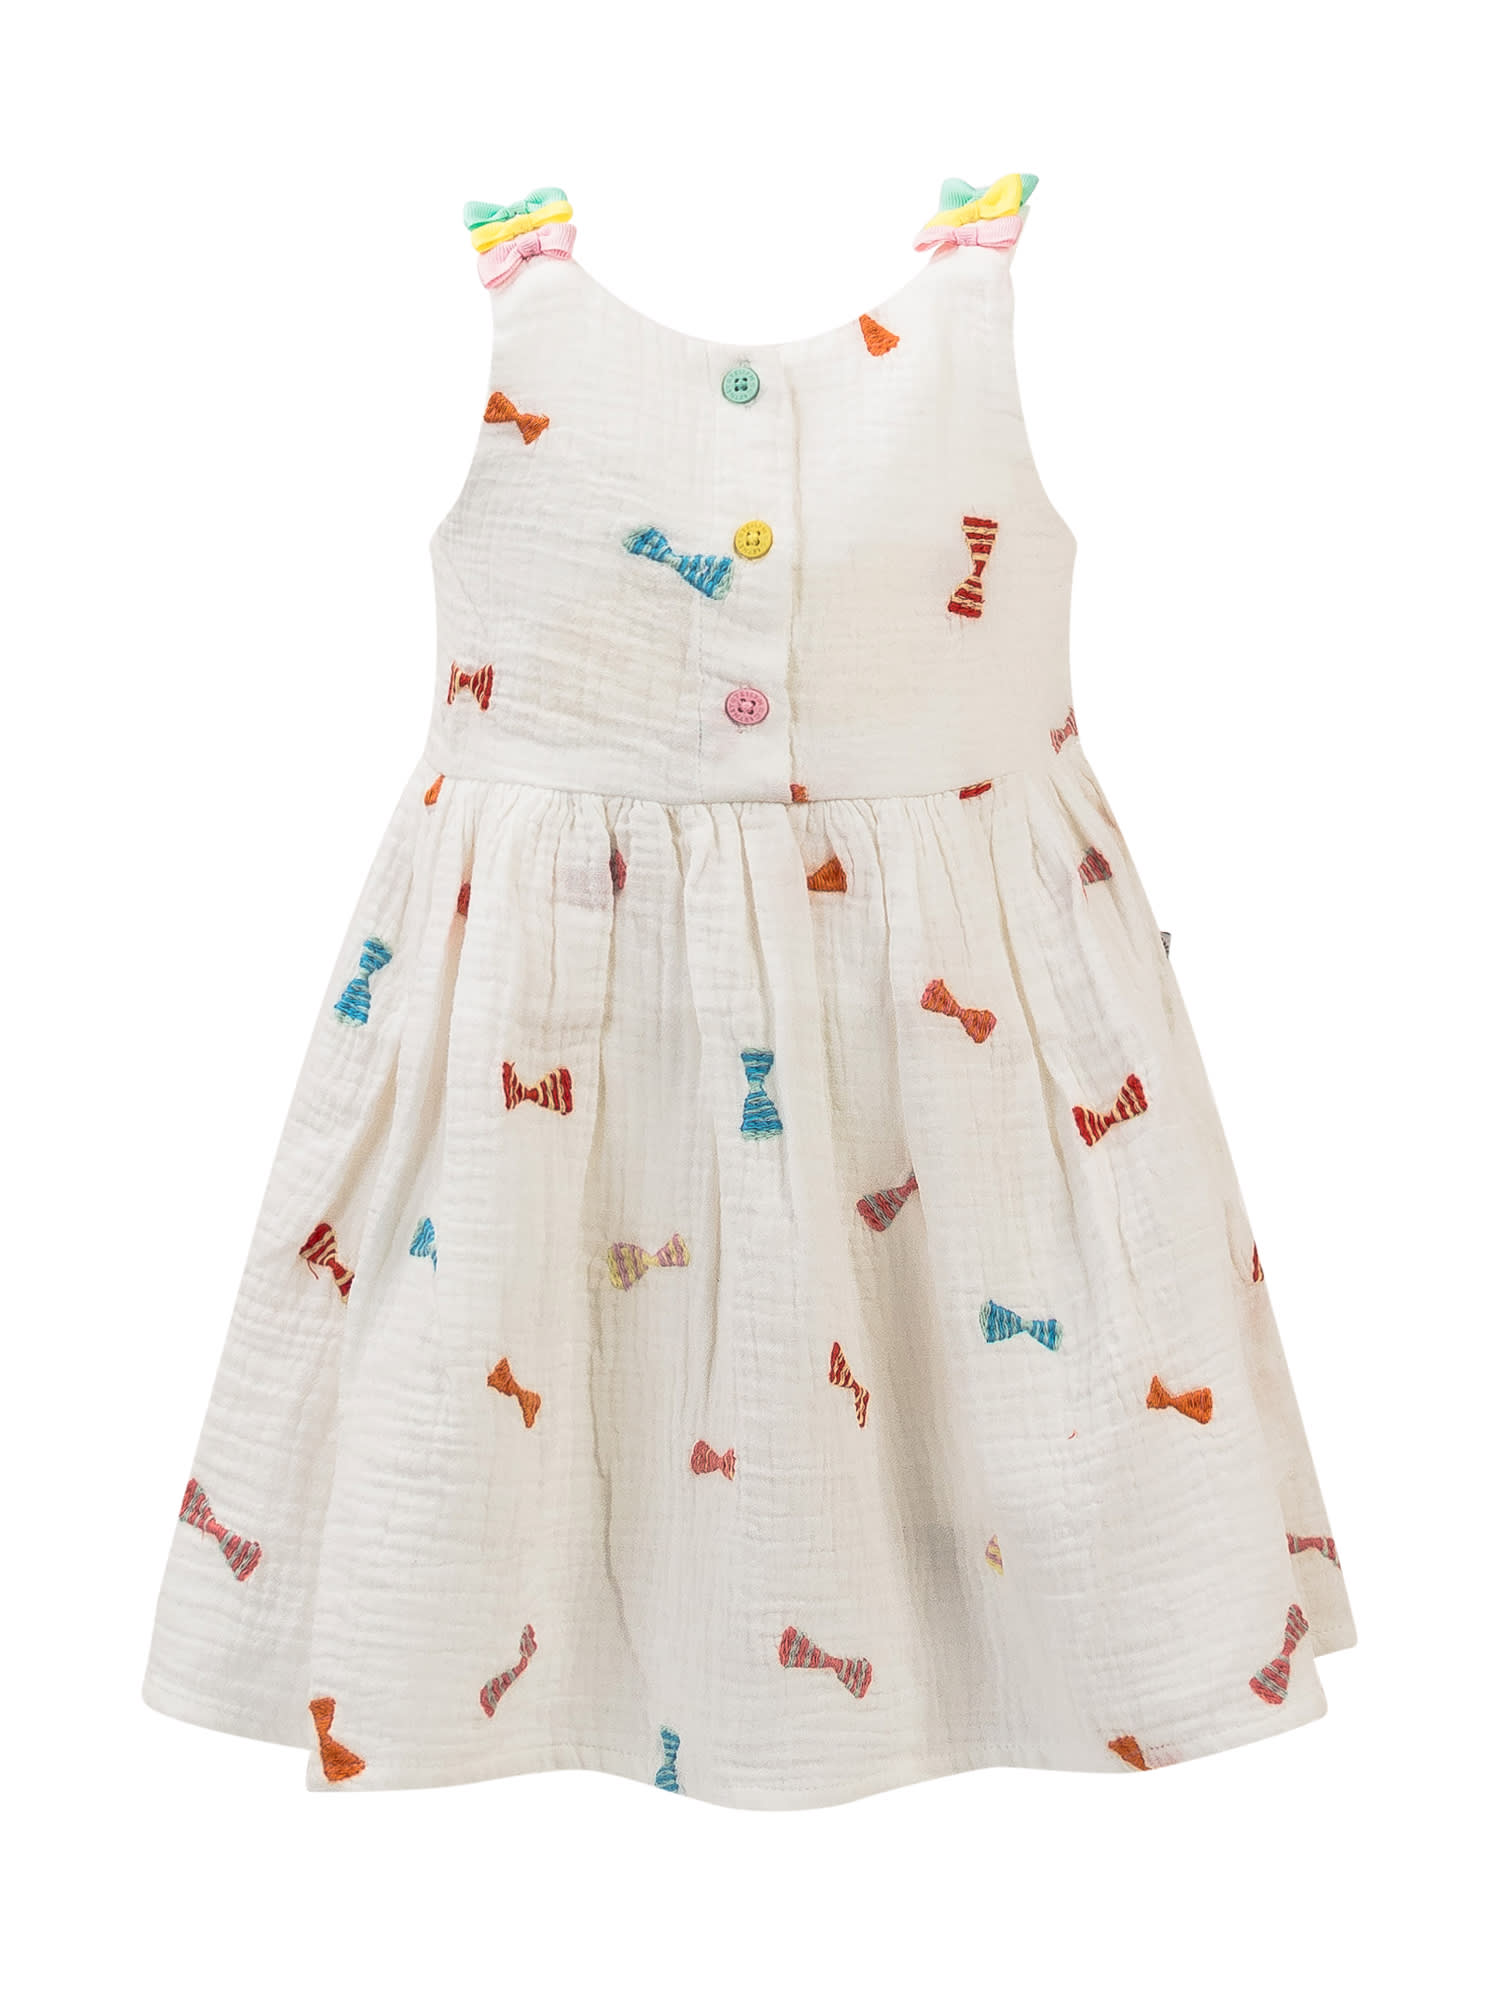 Stella Mccartney Babies' Dress And Shorts Set In Avorio/embroidery